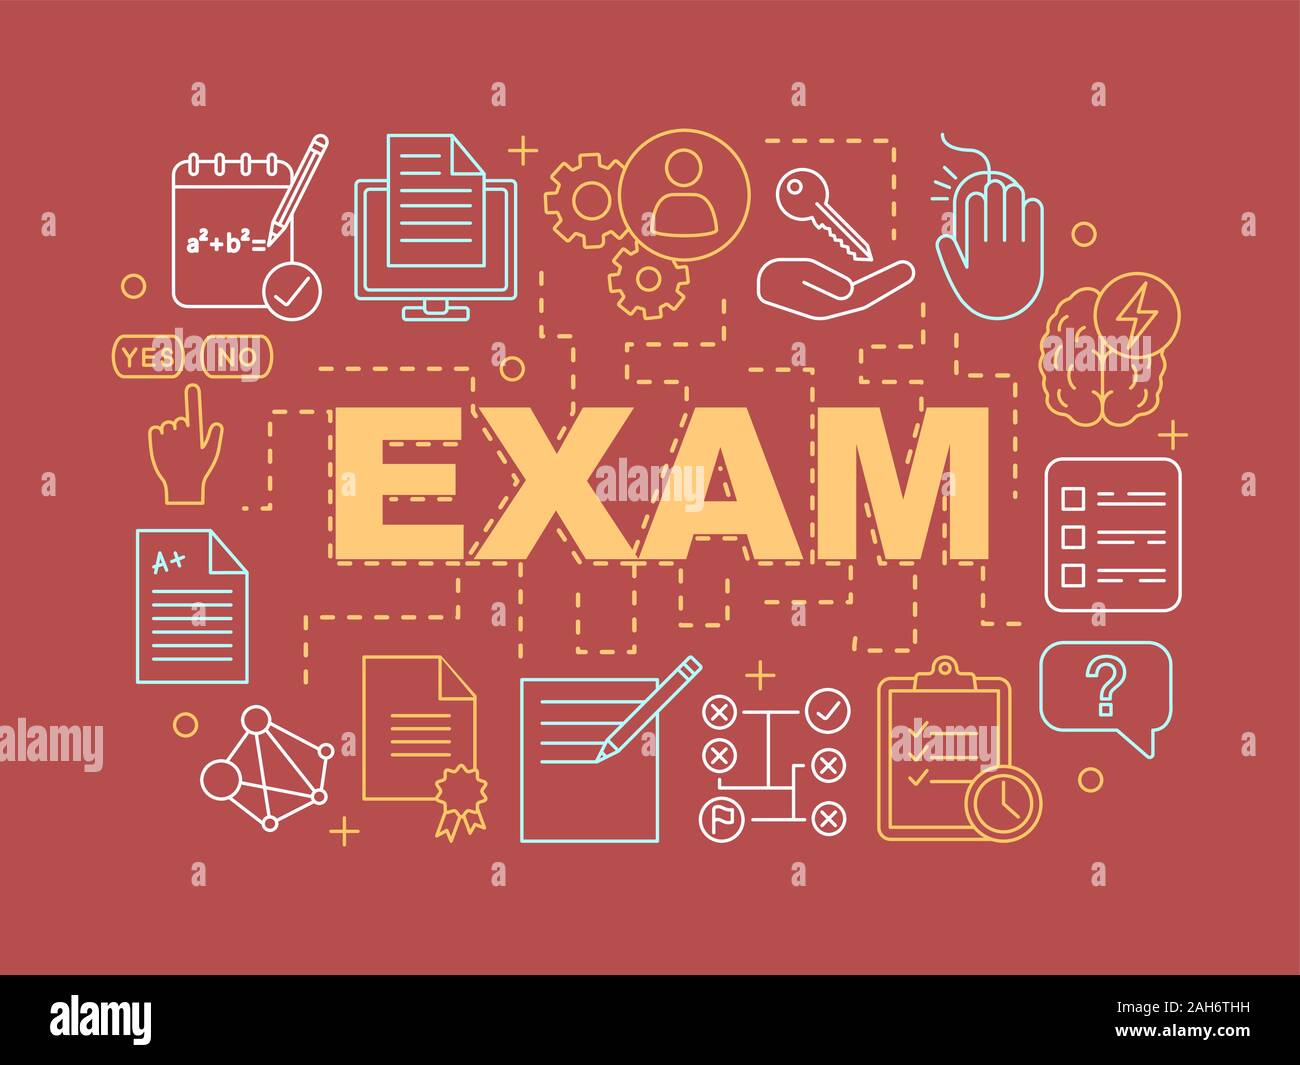 exams-word-concepts-banner-examination-presentation-website-educational-testing-solution-searching-isolated-lettering-typography-idea-with-linea-2AH6THH